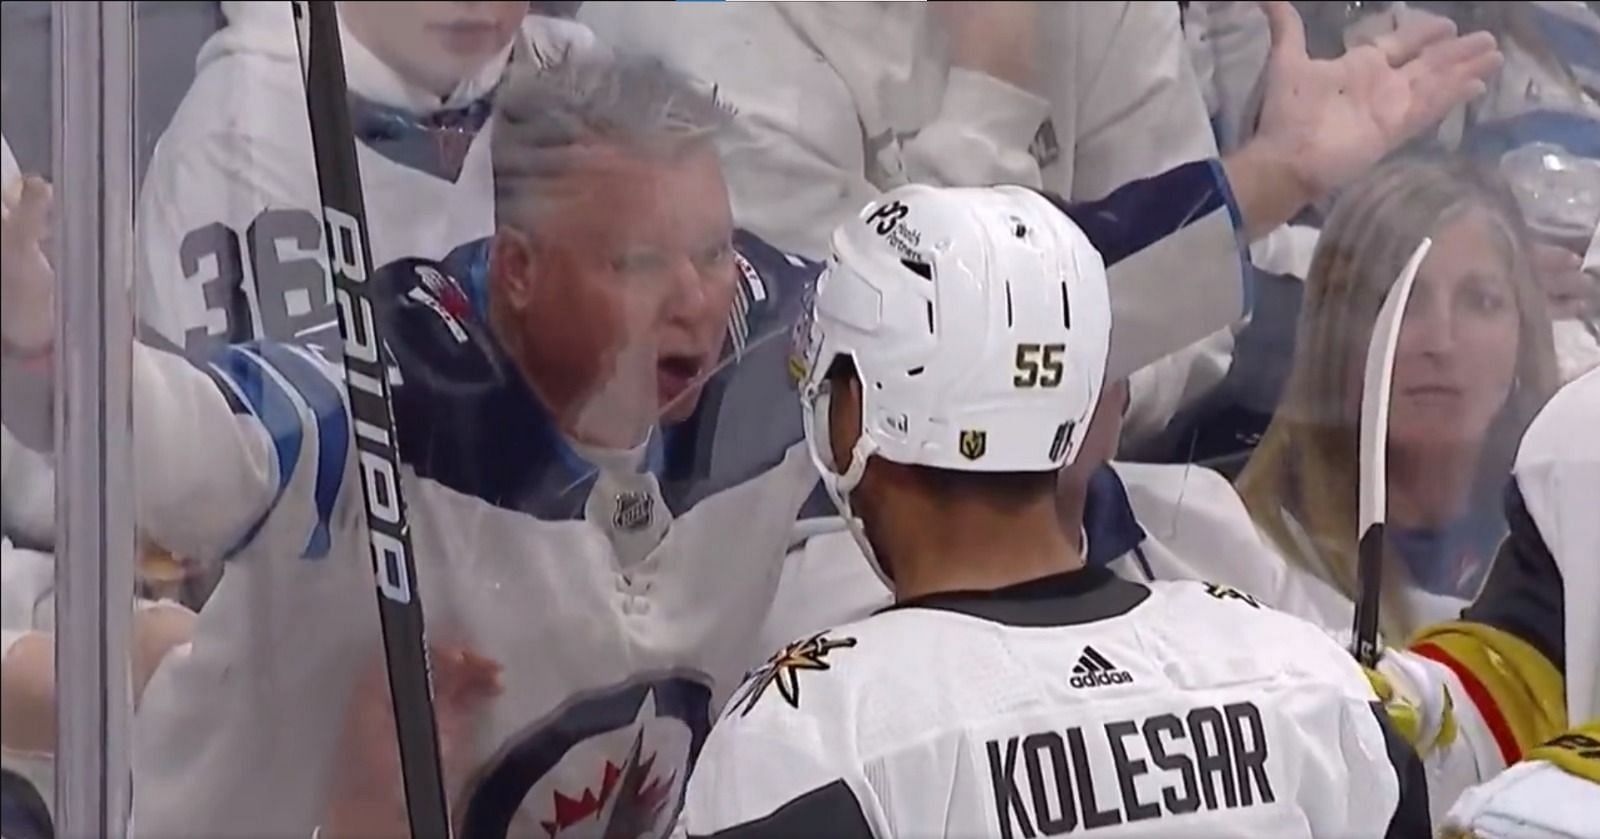 Keegan Kolesar has intense stare down contest with Jets fan after scoring Knights